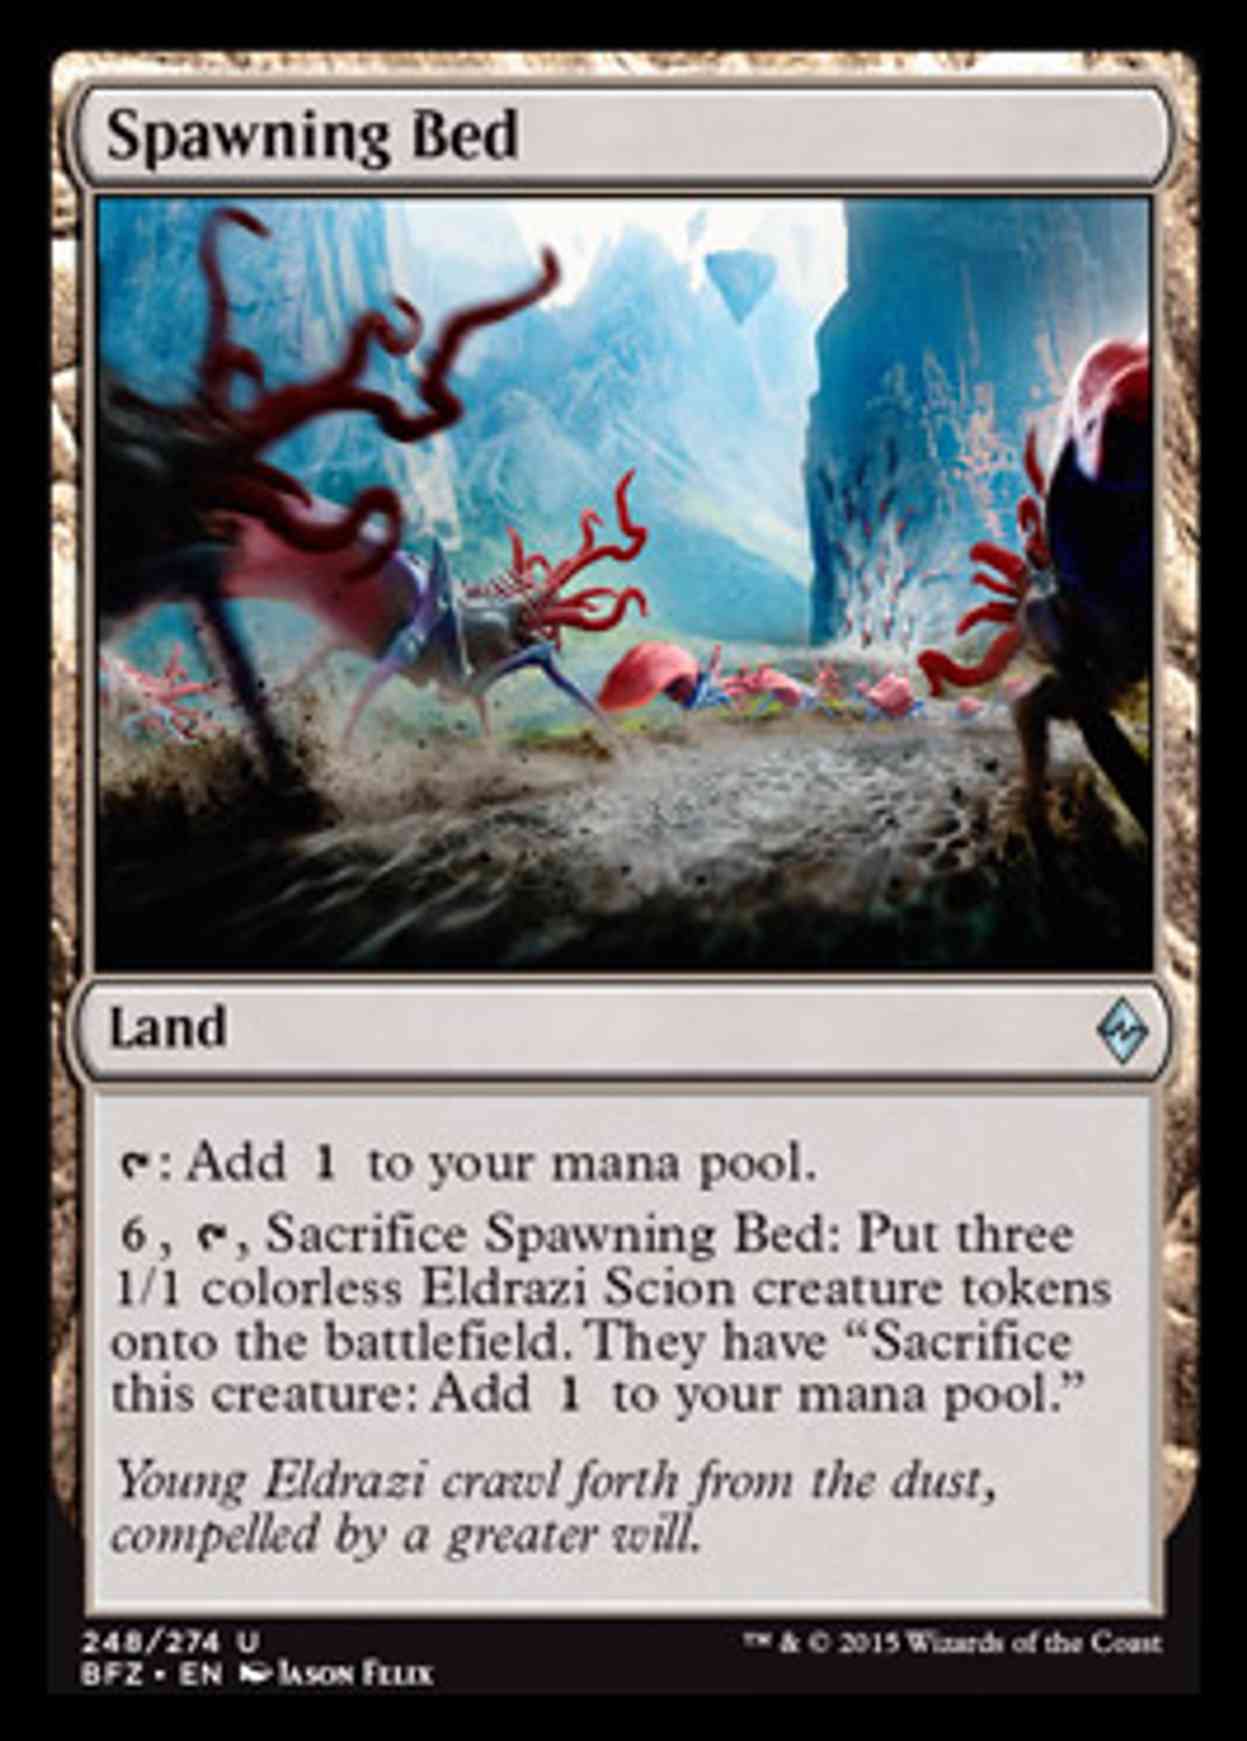 Spawning Bed magic card front